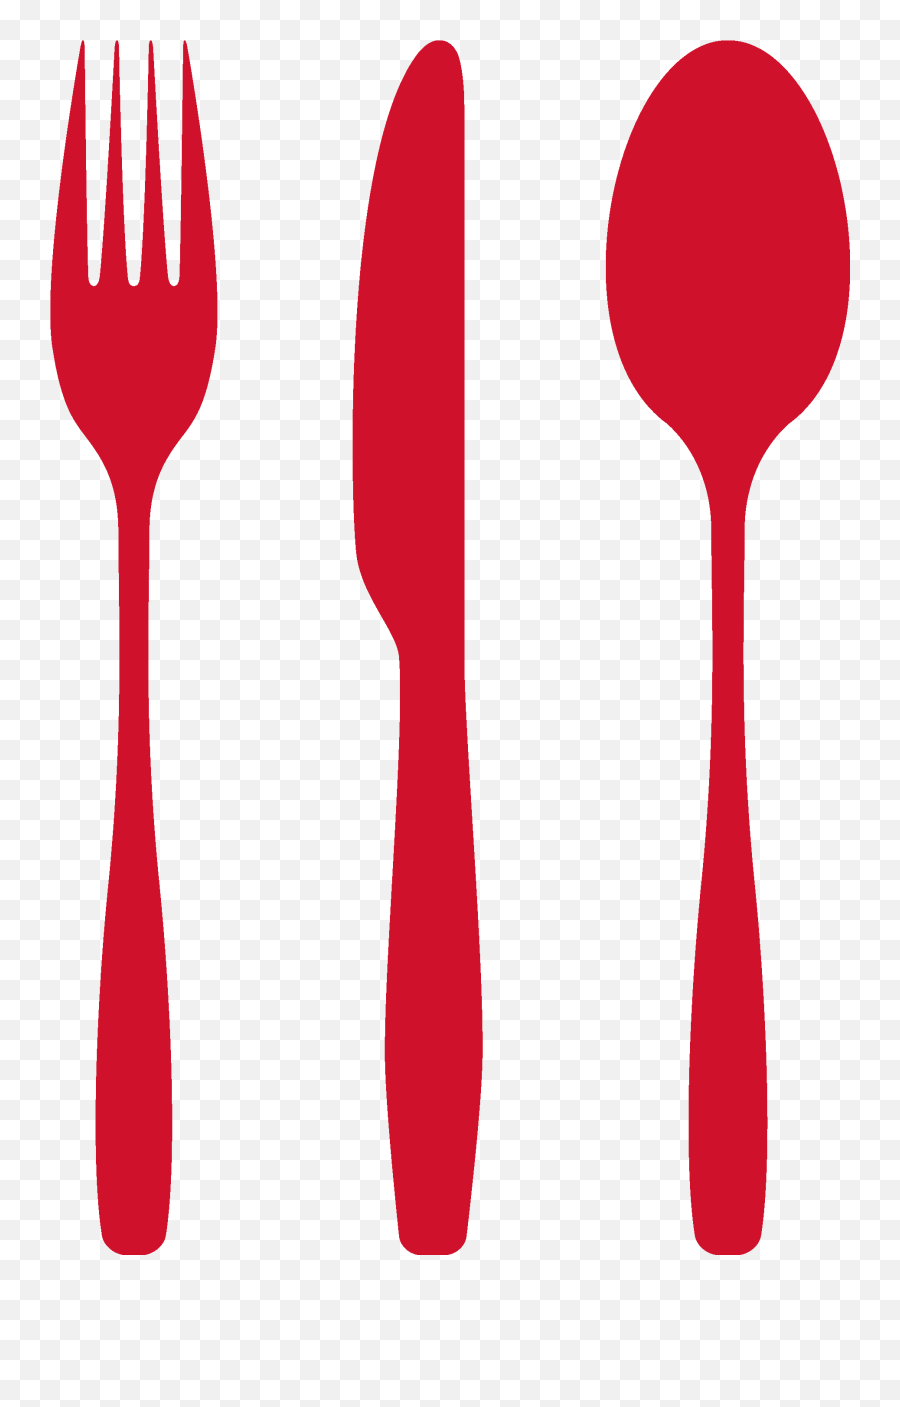 Fork Clipart Red Spoon Fork Red Spoon - Red Spoon And Fork Png Emoji,Spoon Clipart